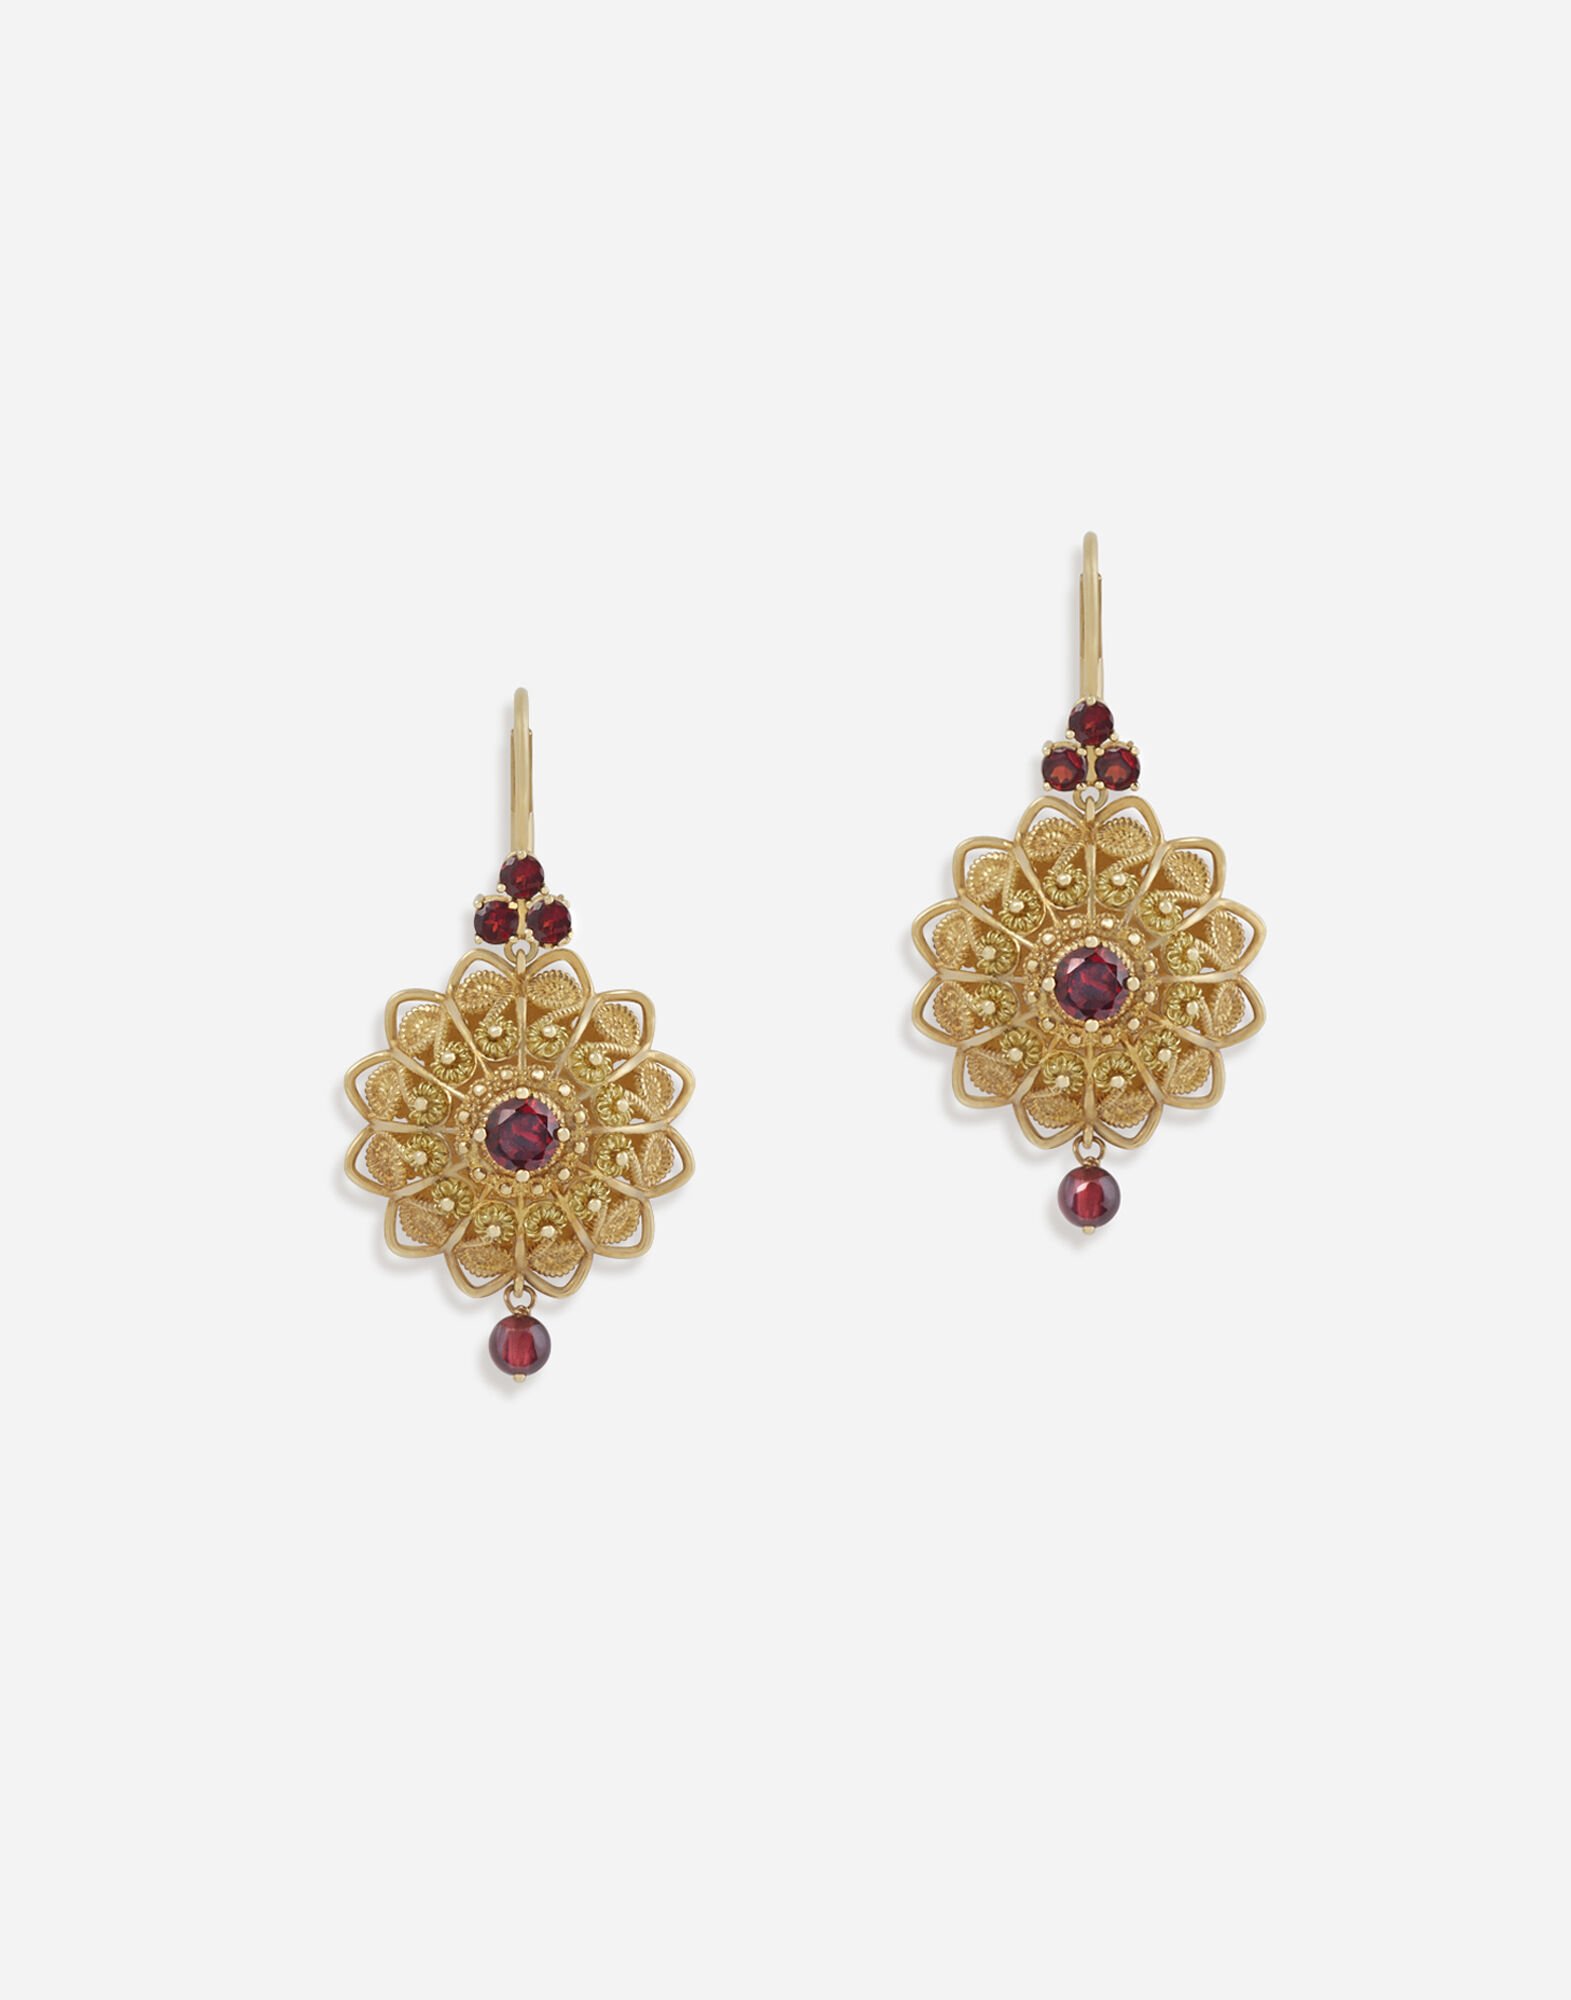 ${brand} Pizzo earrings in yellow gold and rhodolite garnets ${colorDescription} ${masterID}